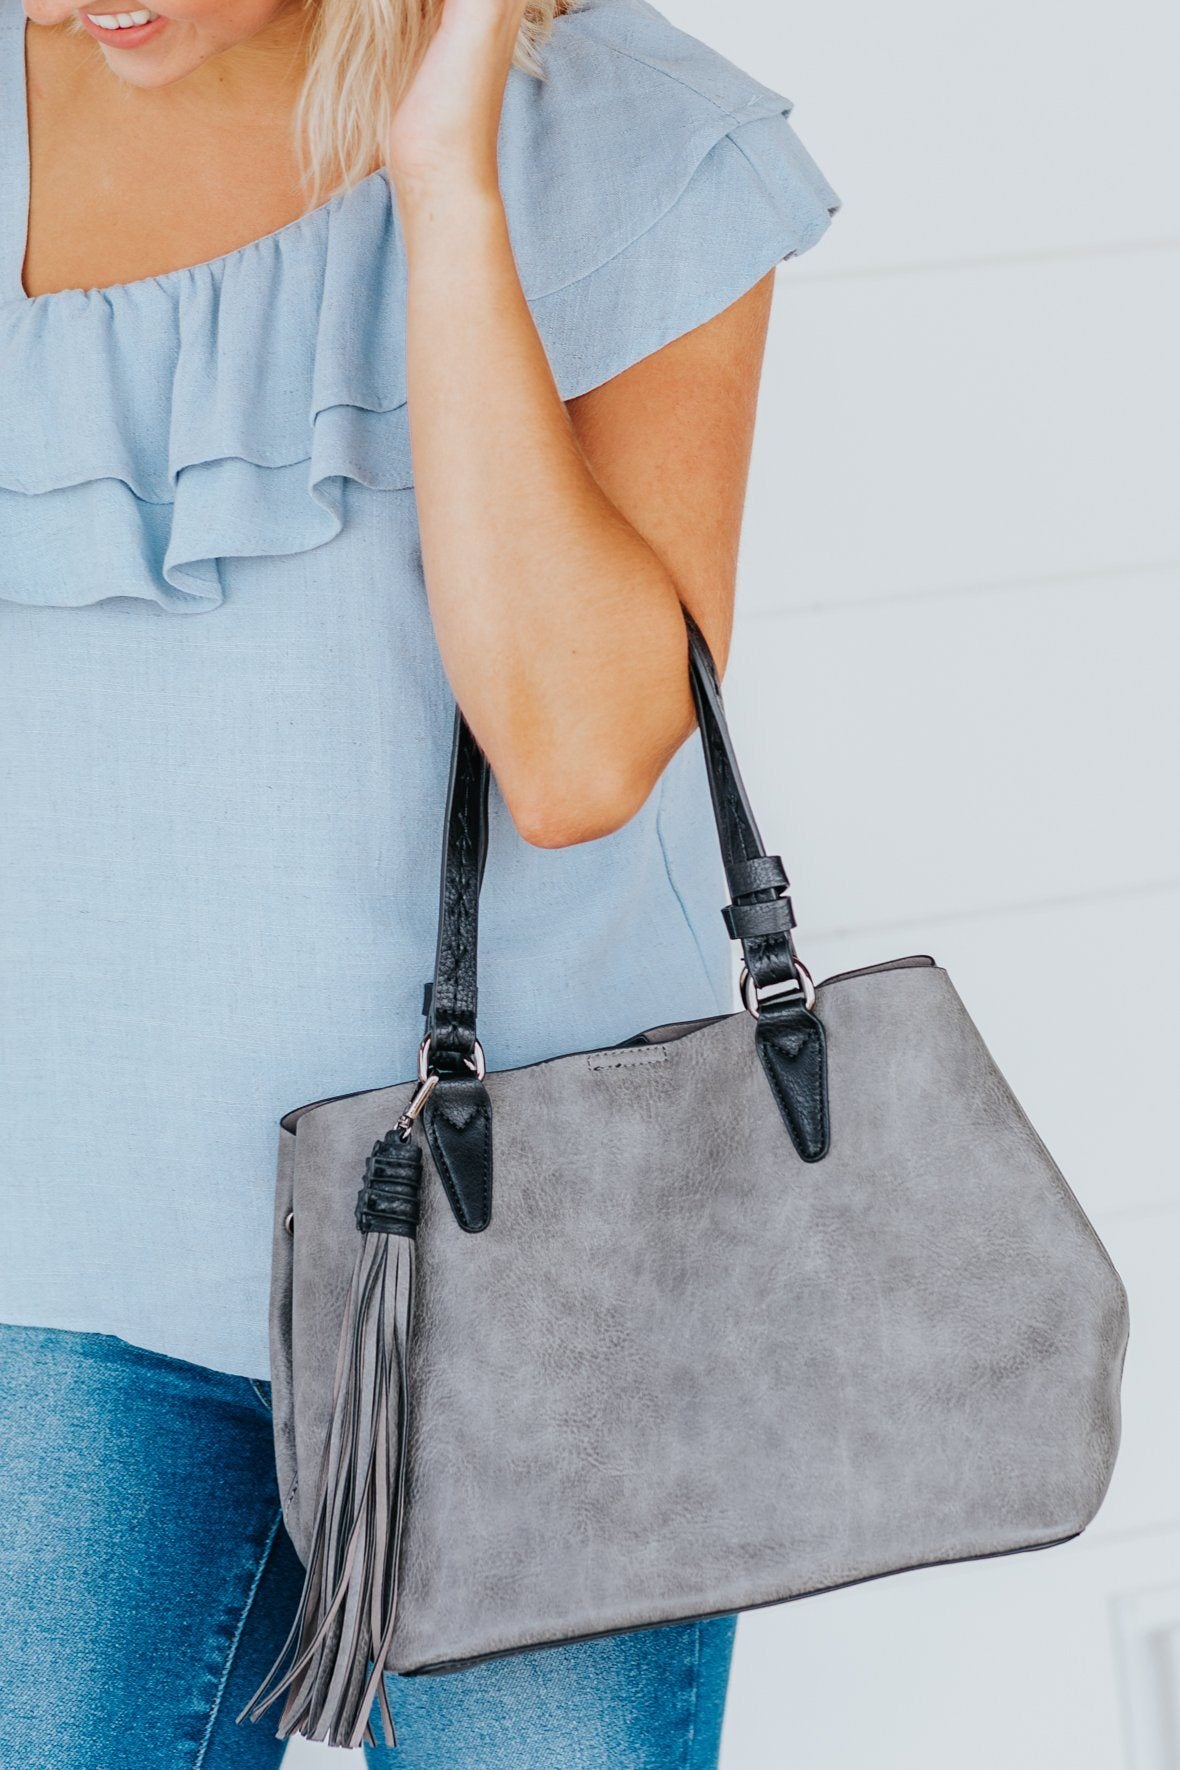 Everything That's On Your Mind Purse In Charcoal - Filly Flair